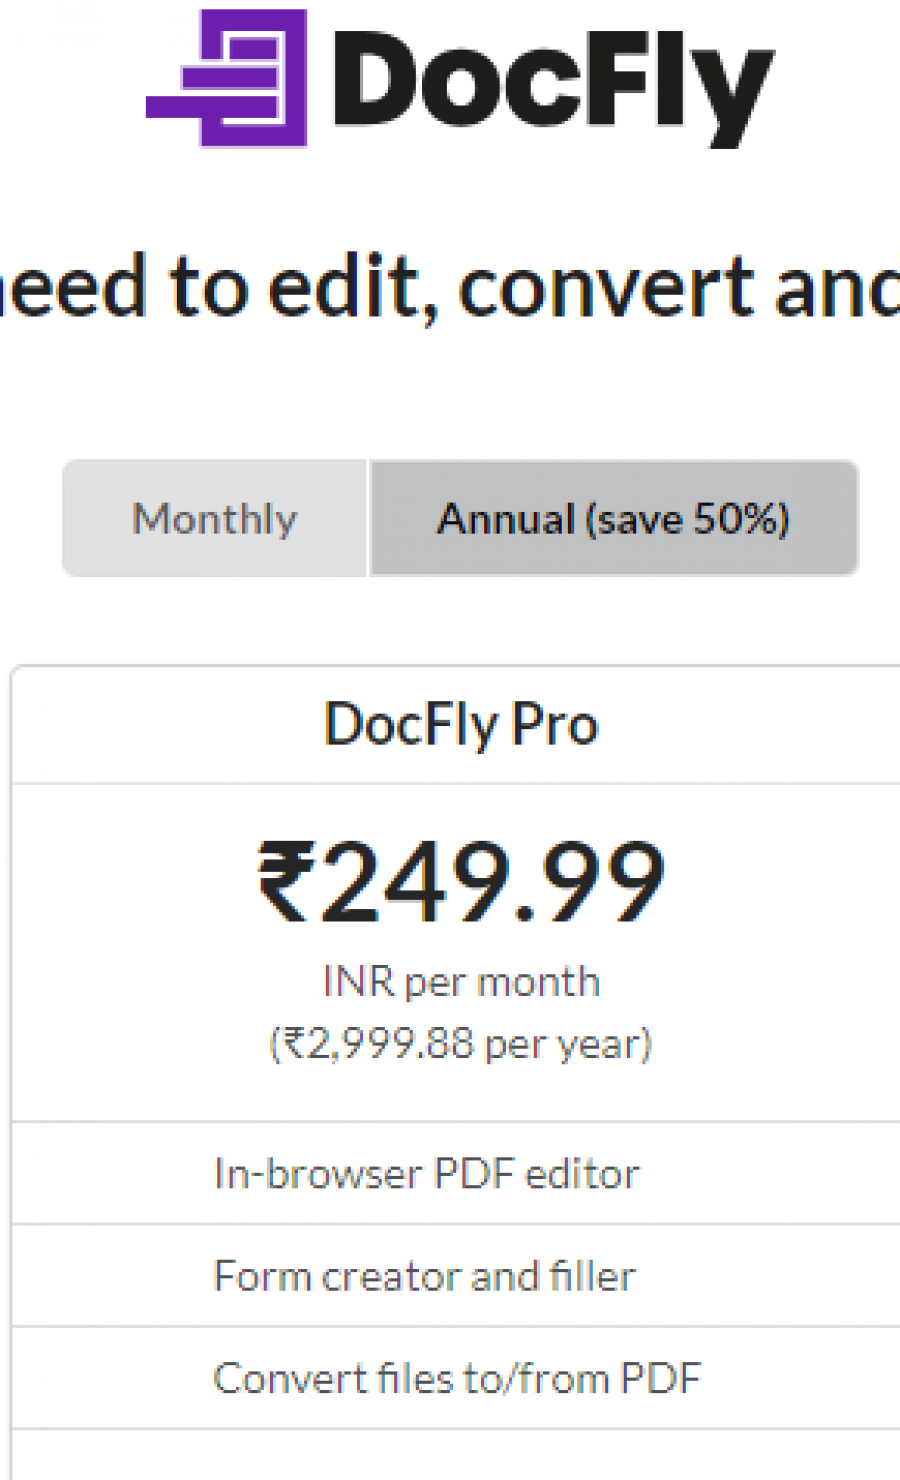 DocFly Pricing